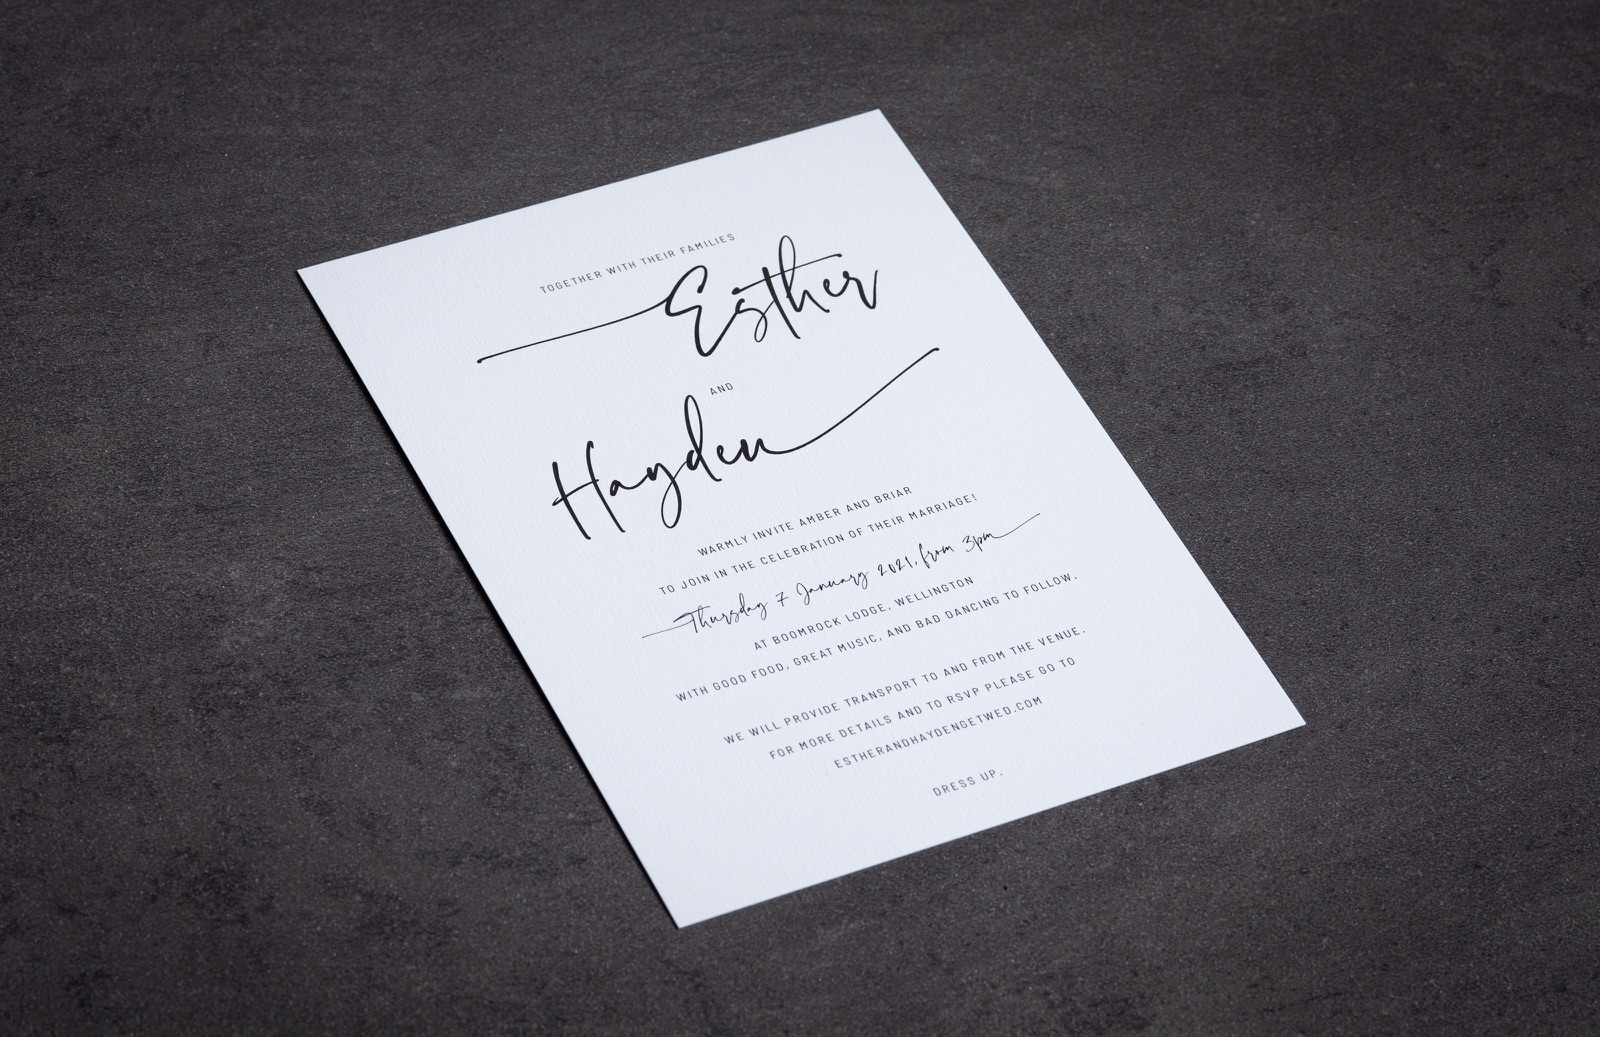 Printing Premium Wedding Invites for Esther & Hayden: A Touch of Elegance.